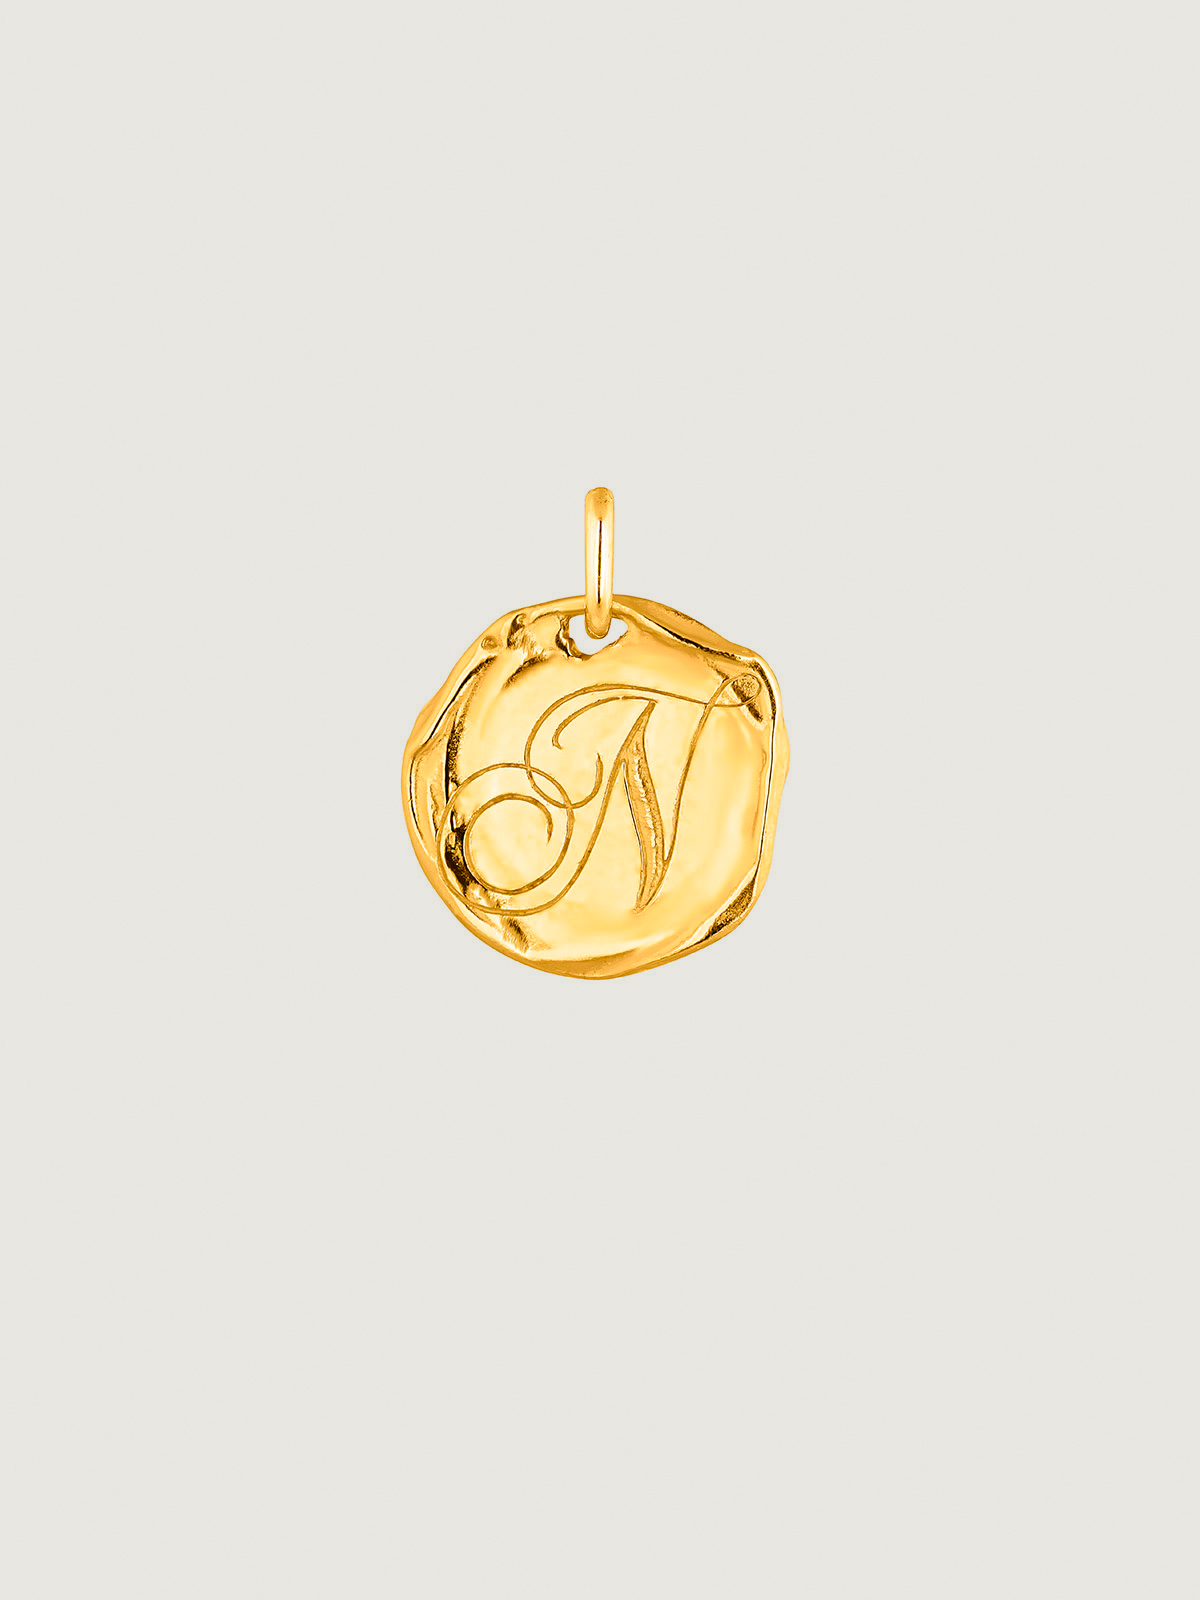 Handcrafted 925 silver charm bathed in 18K yellow gold with initial N